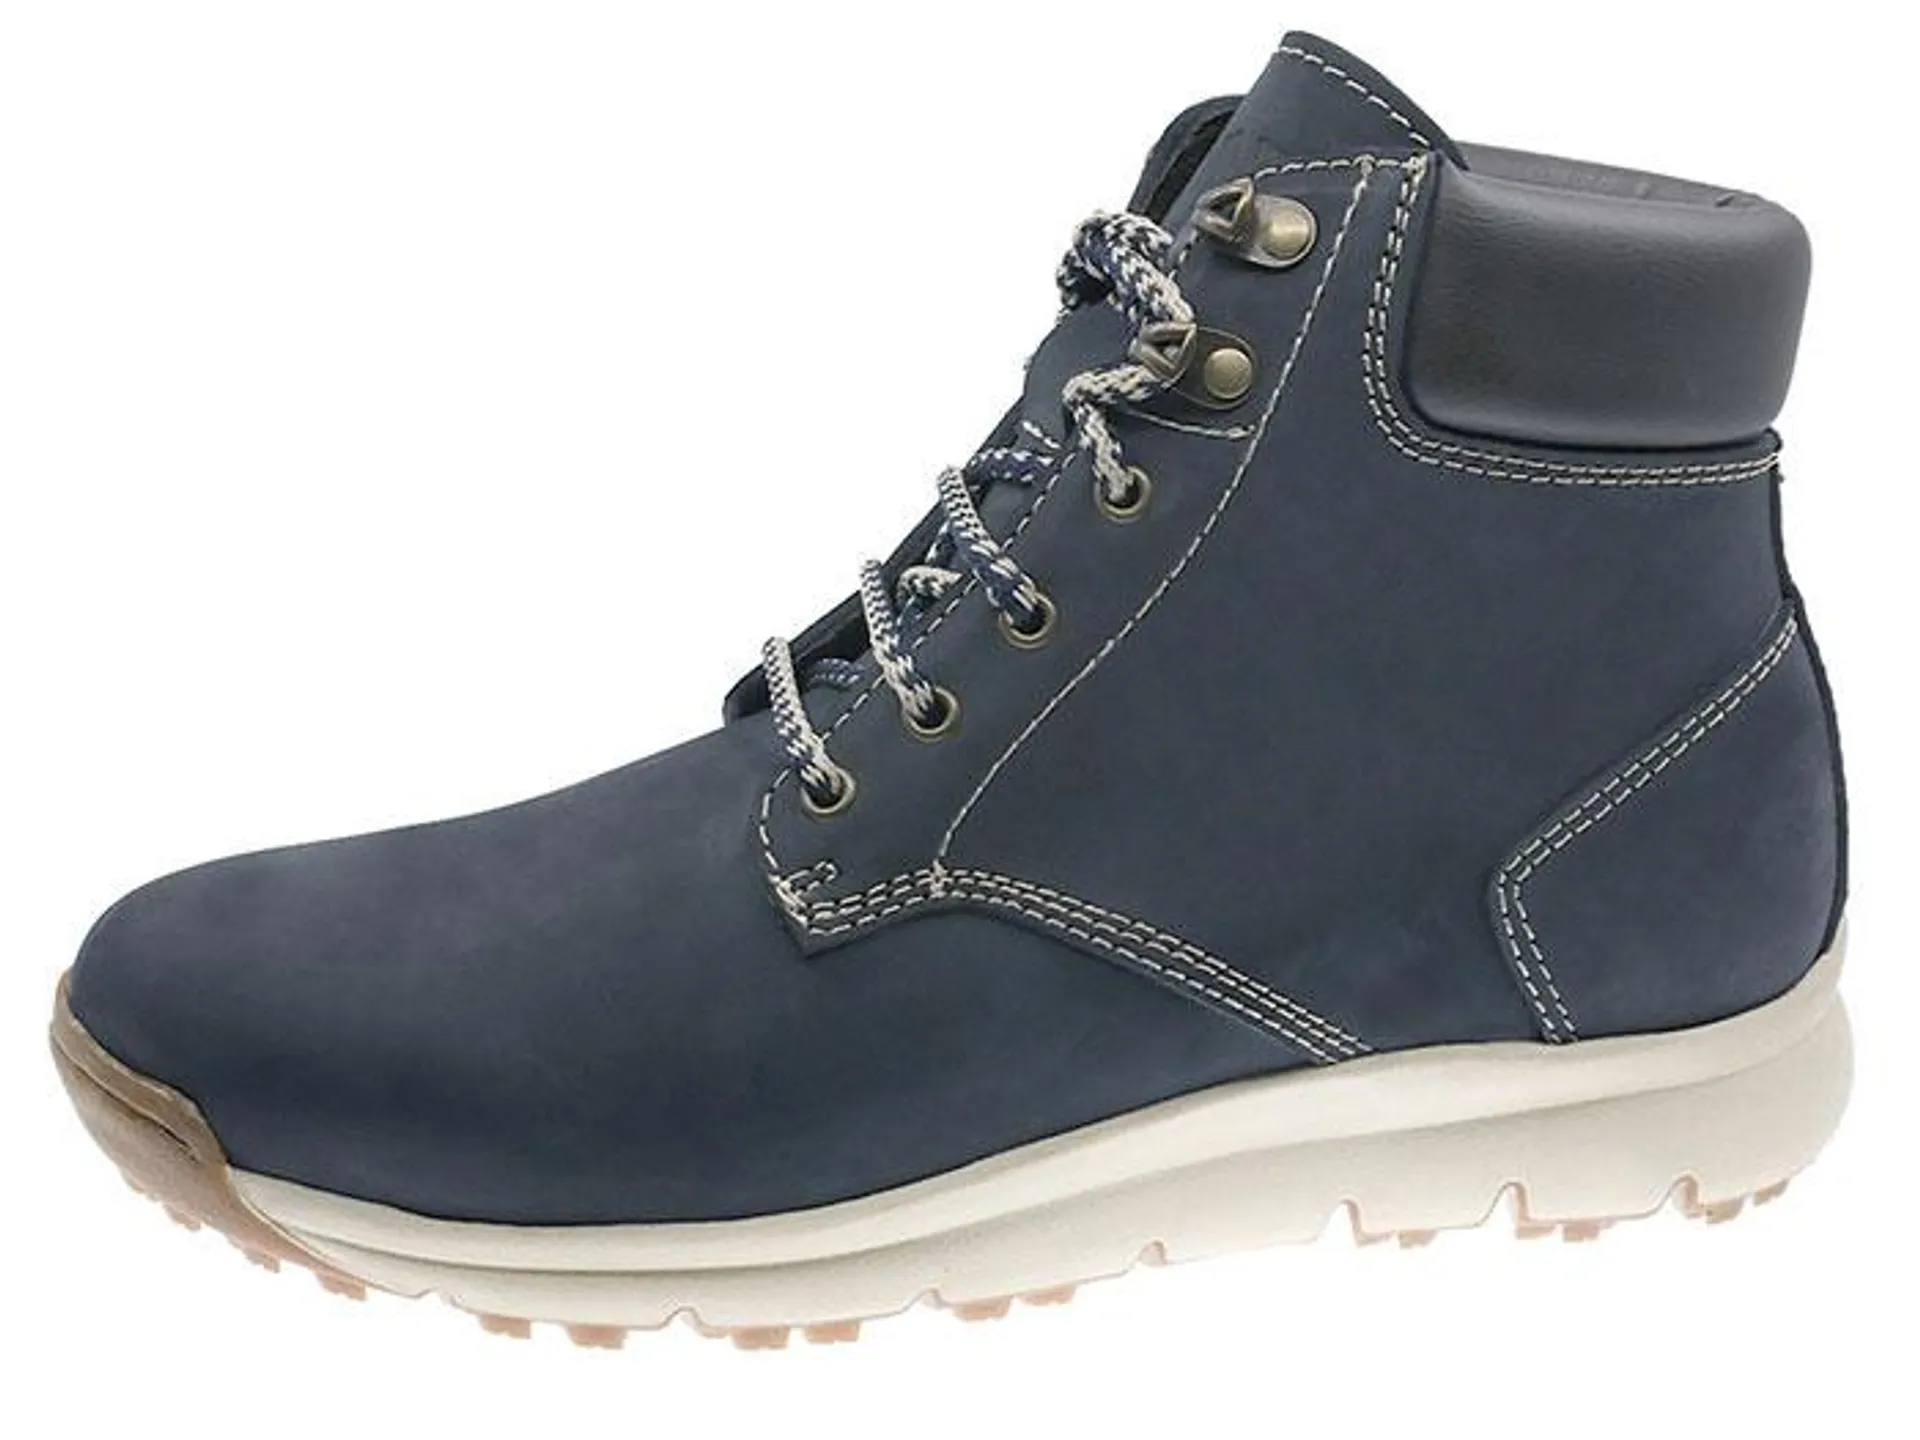 Casual boots for men